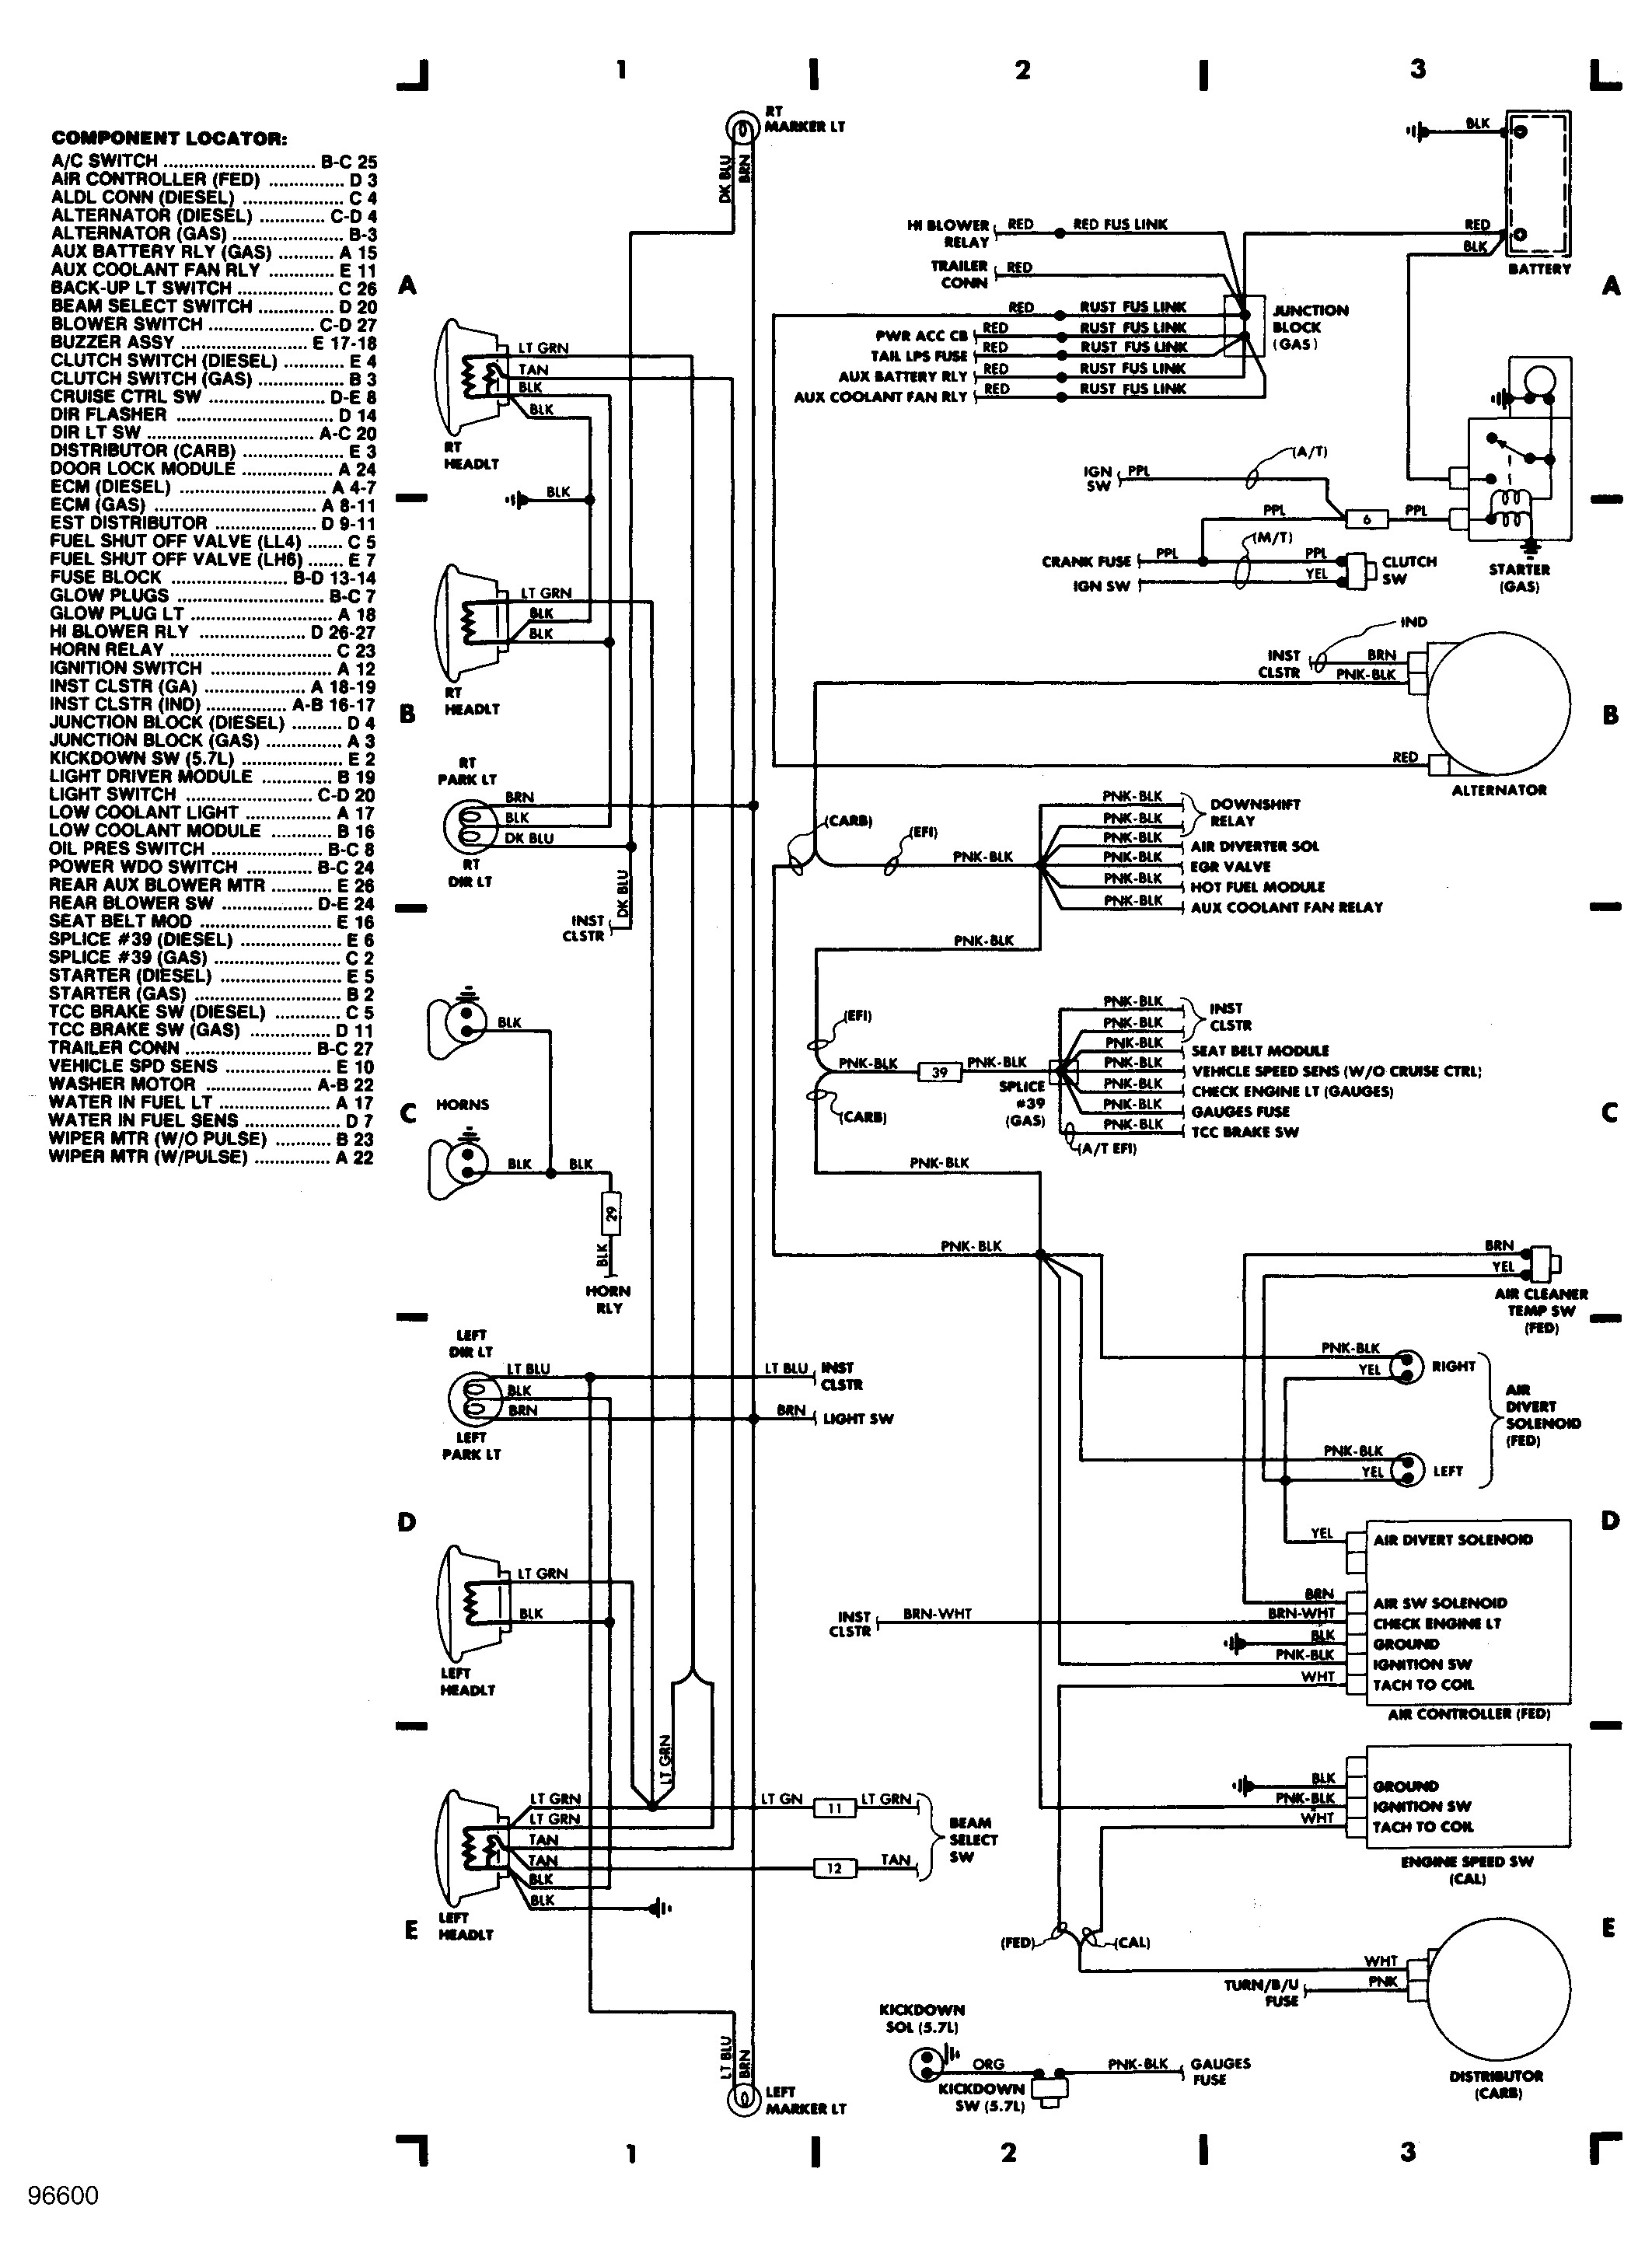 Wiring A 1985 Chevy Stering Coloumn Diagram] 1997 Chevy P30 Wiring Diagram Full Version Hd Of Wiring A 1985 Chevy Stering Coloumn